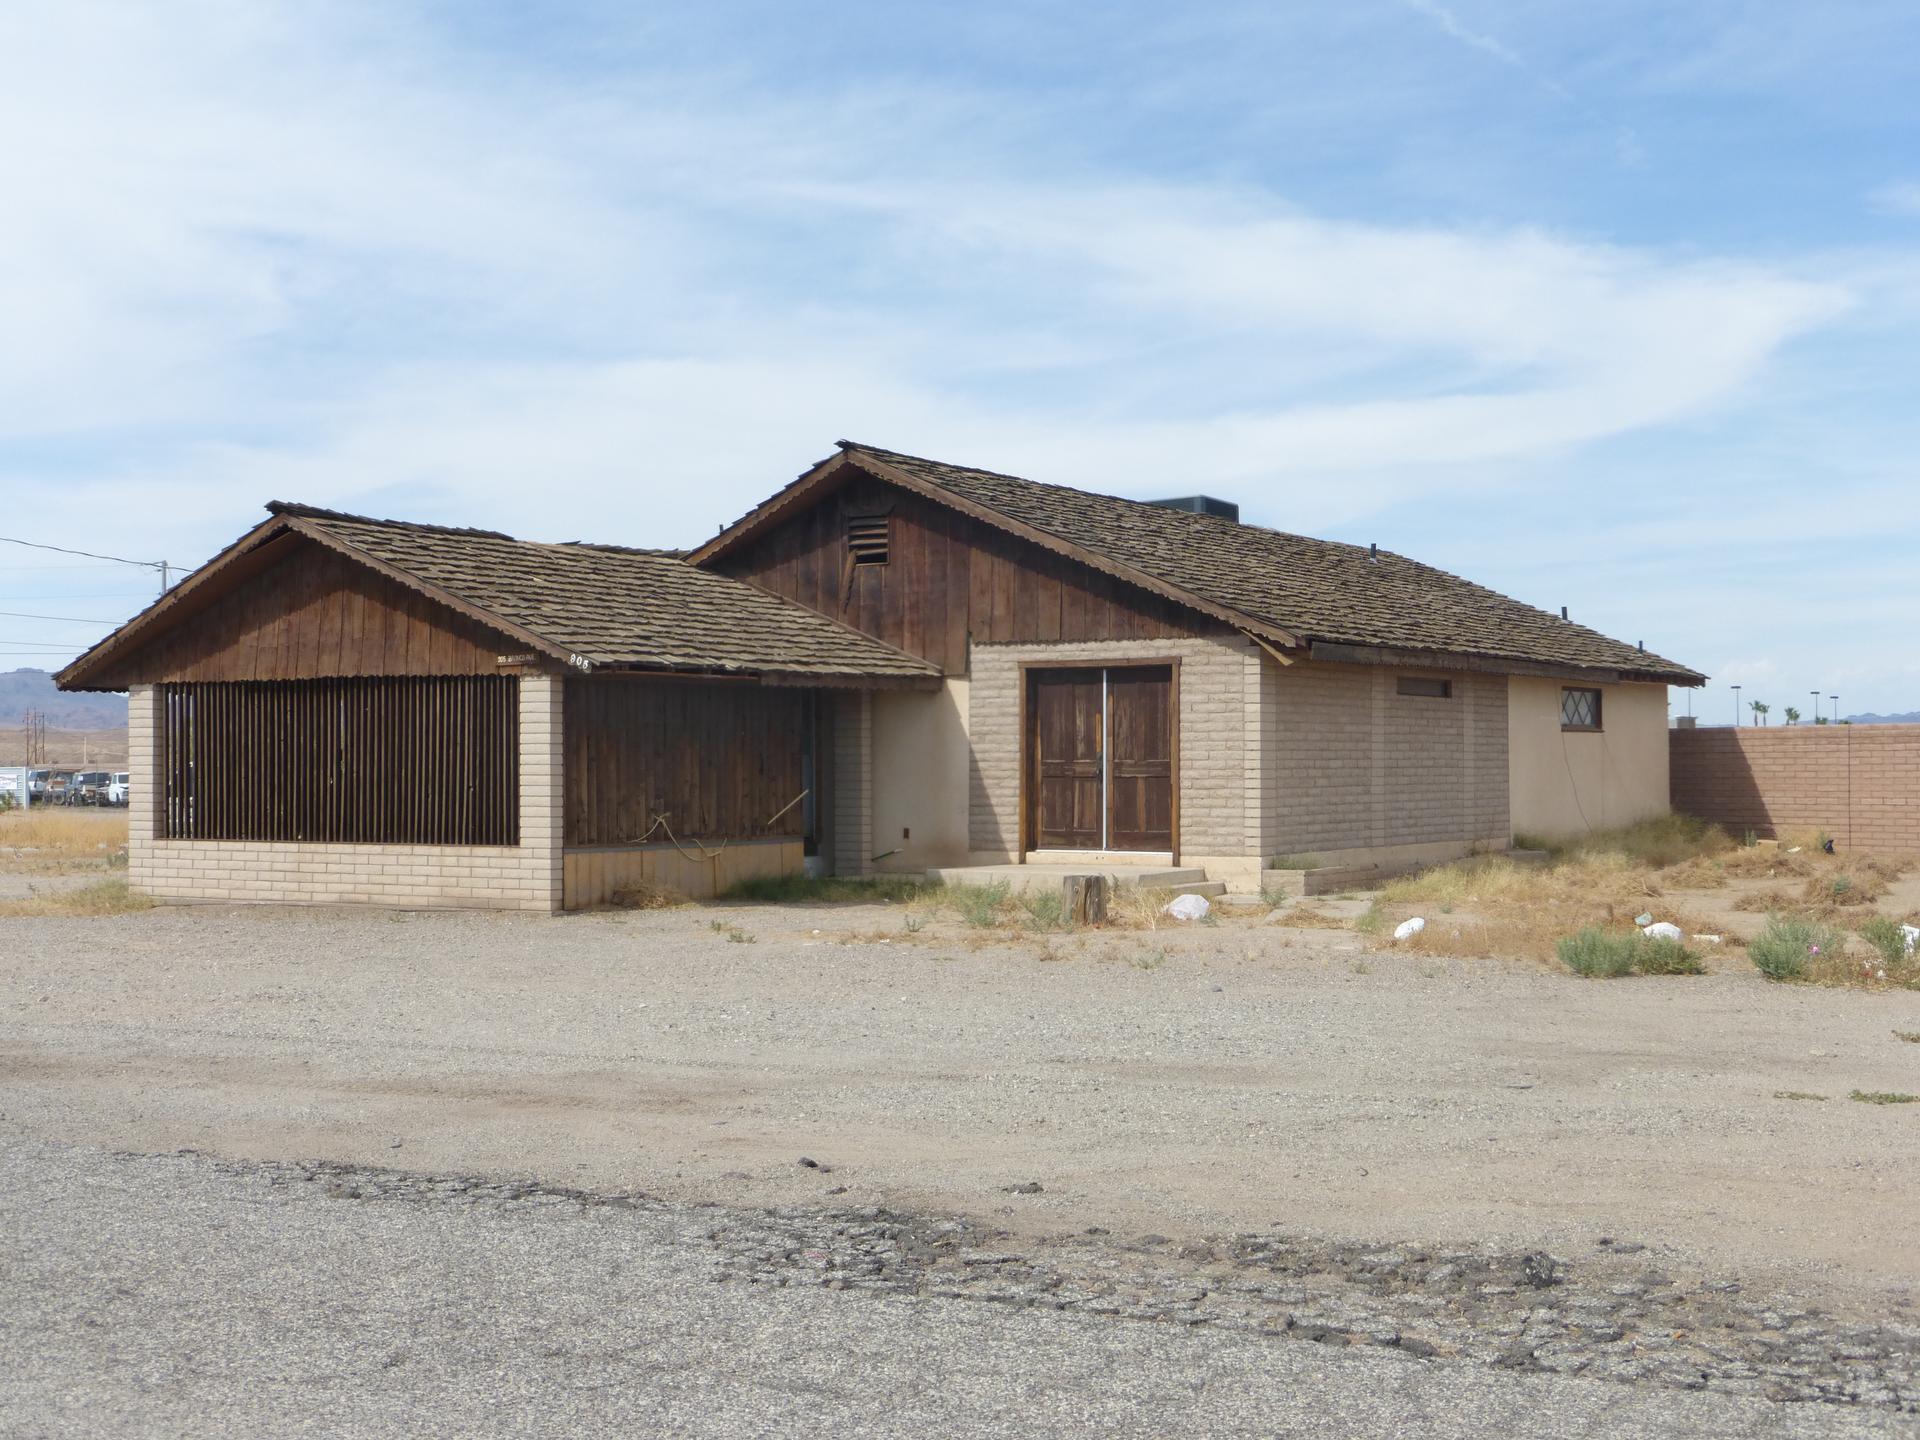 Former barrack turned into a house in nearby town of Parker, Arizona. 